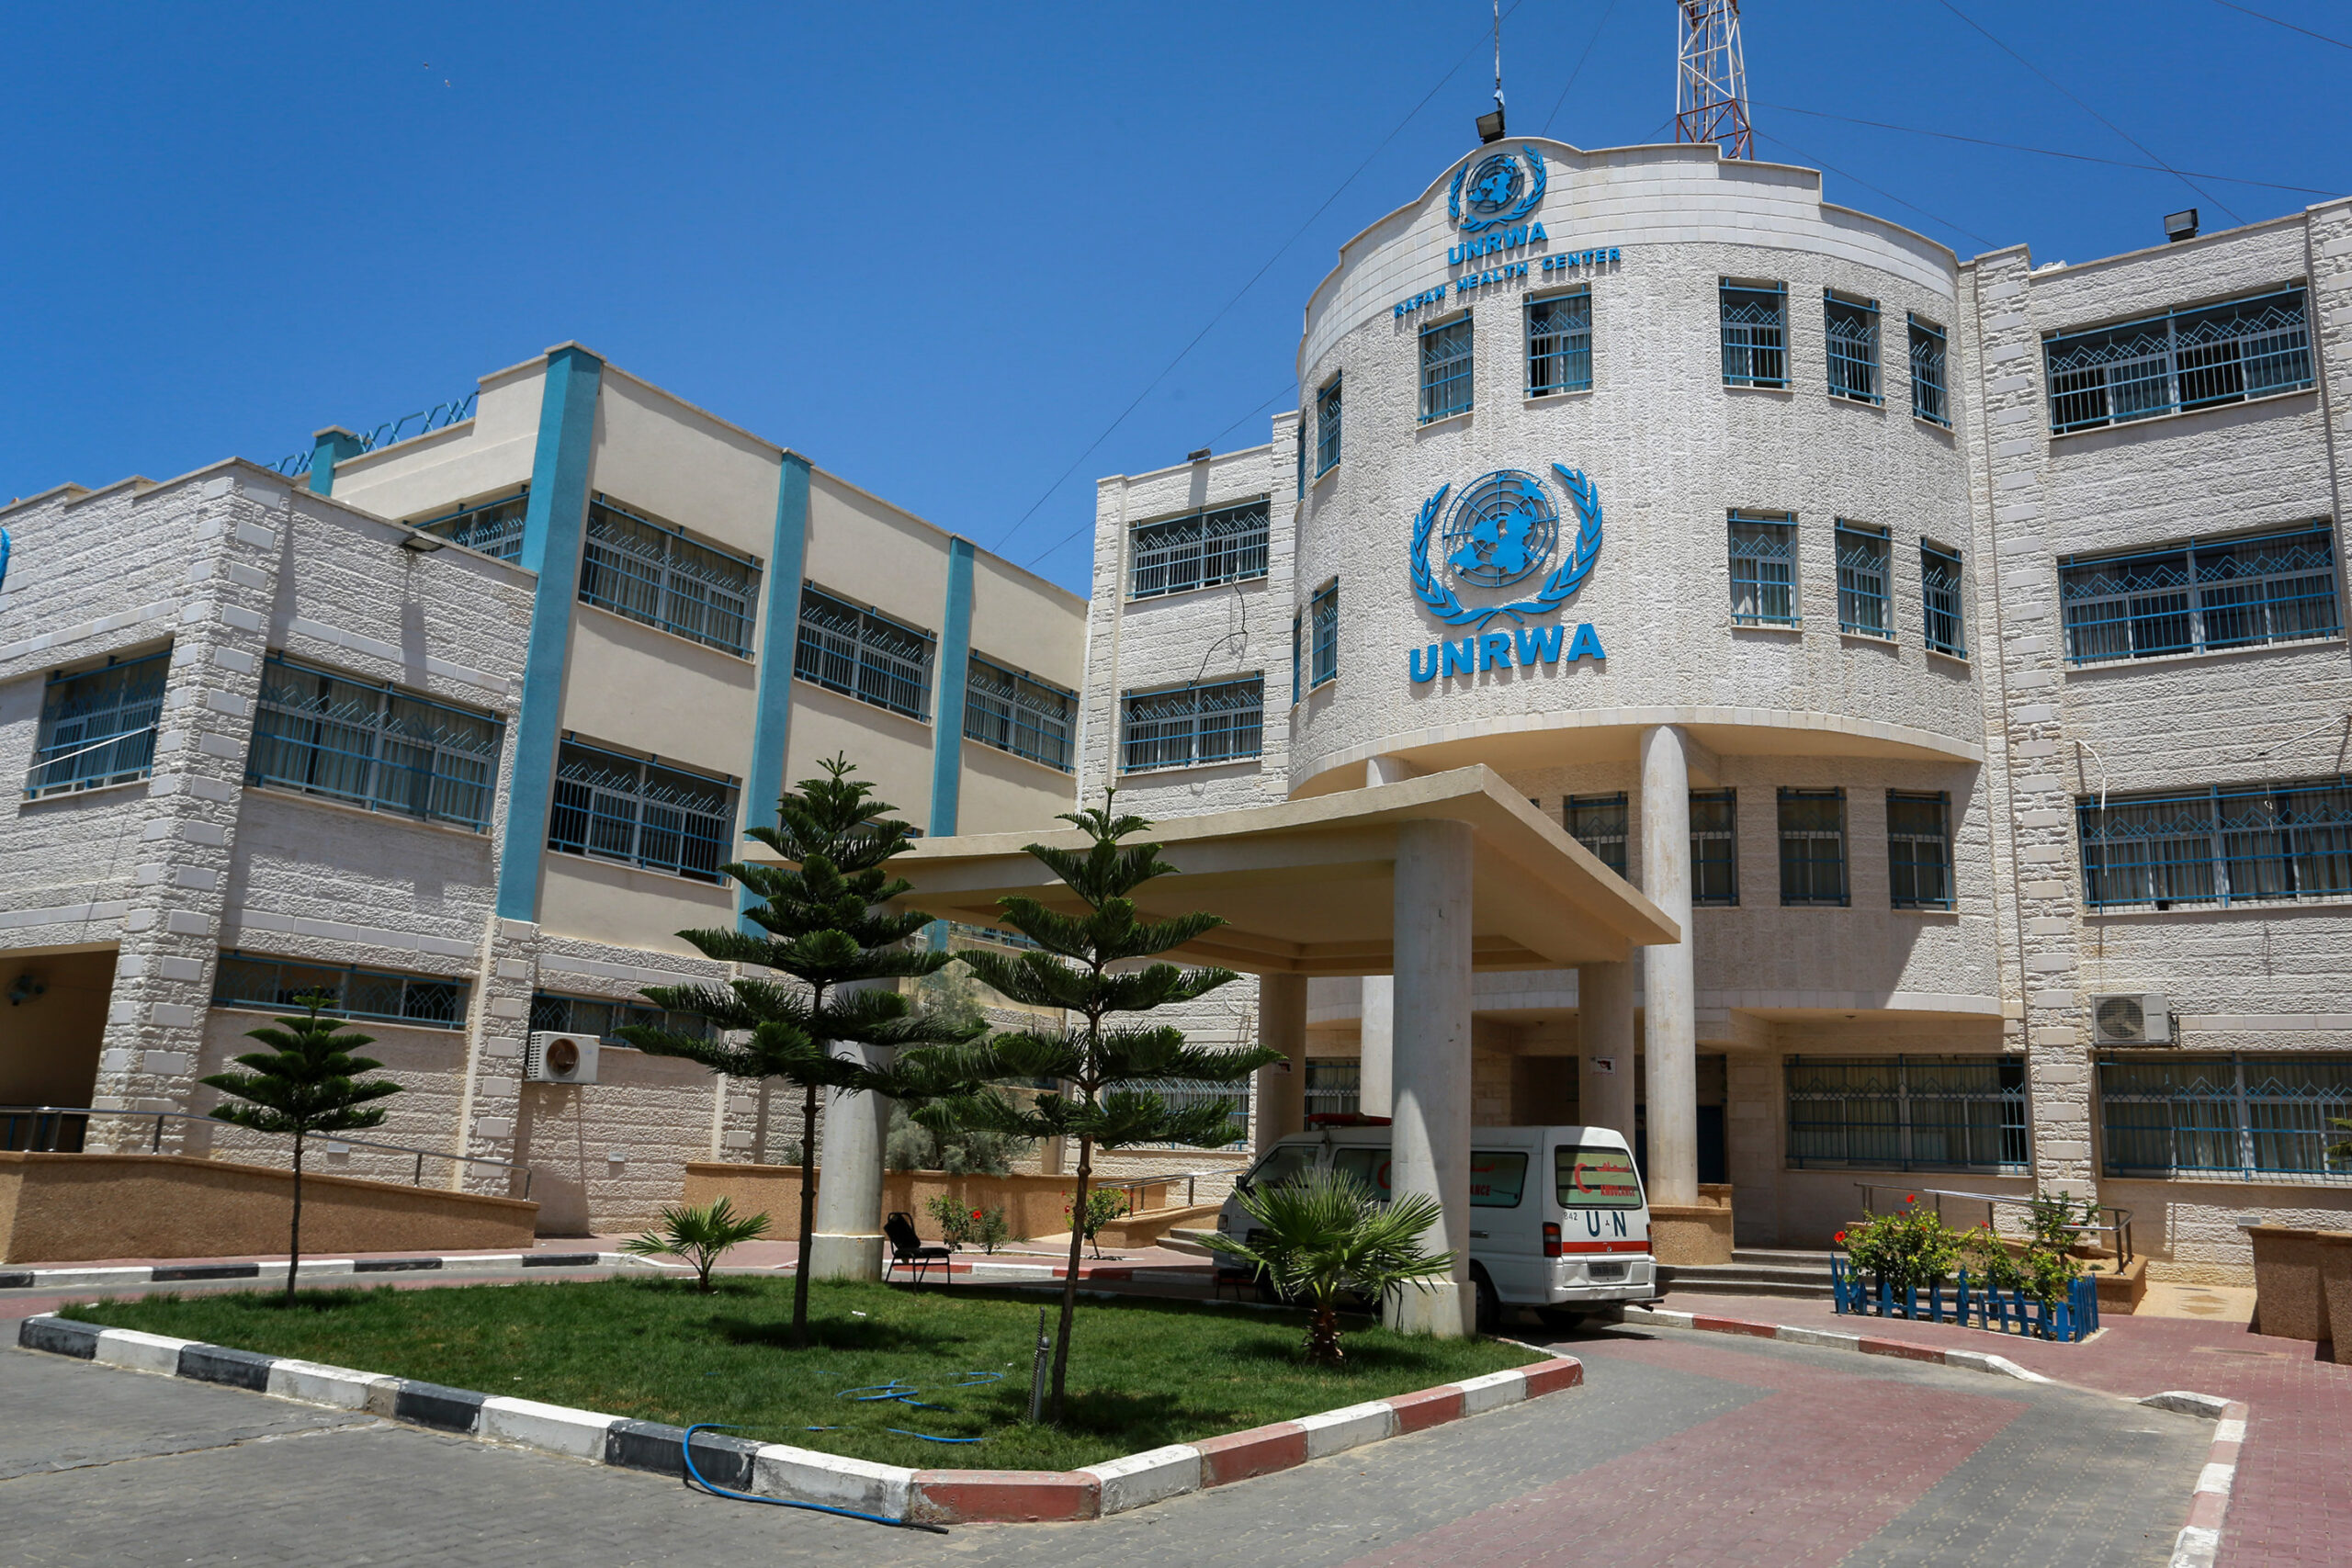 The United Nations Relief and Works Agency (UNRWA) building in the southern Gaza Strip, on July 26, 2018. Photo by Abed Rahim Khatib/Flash90.